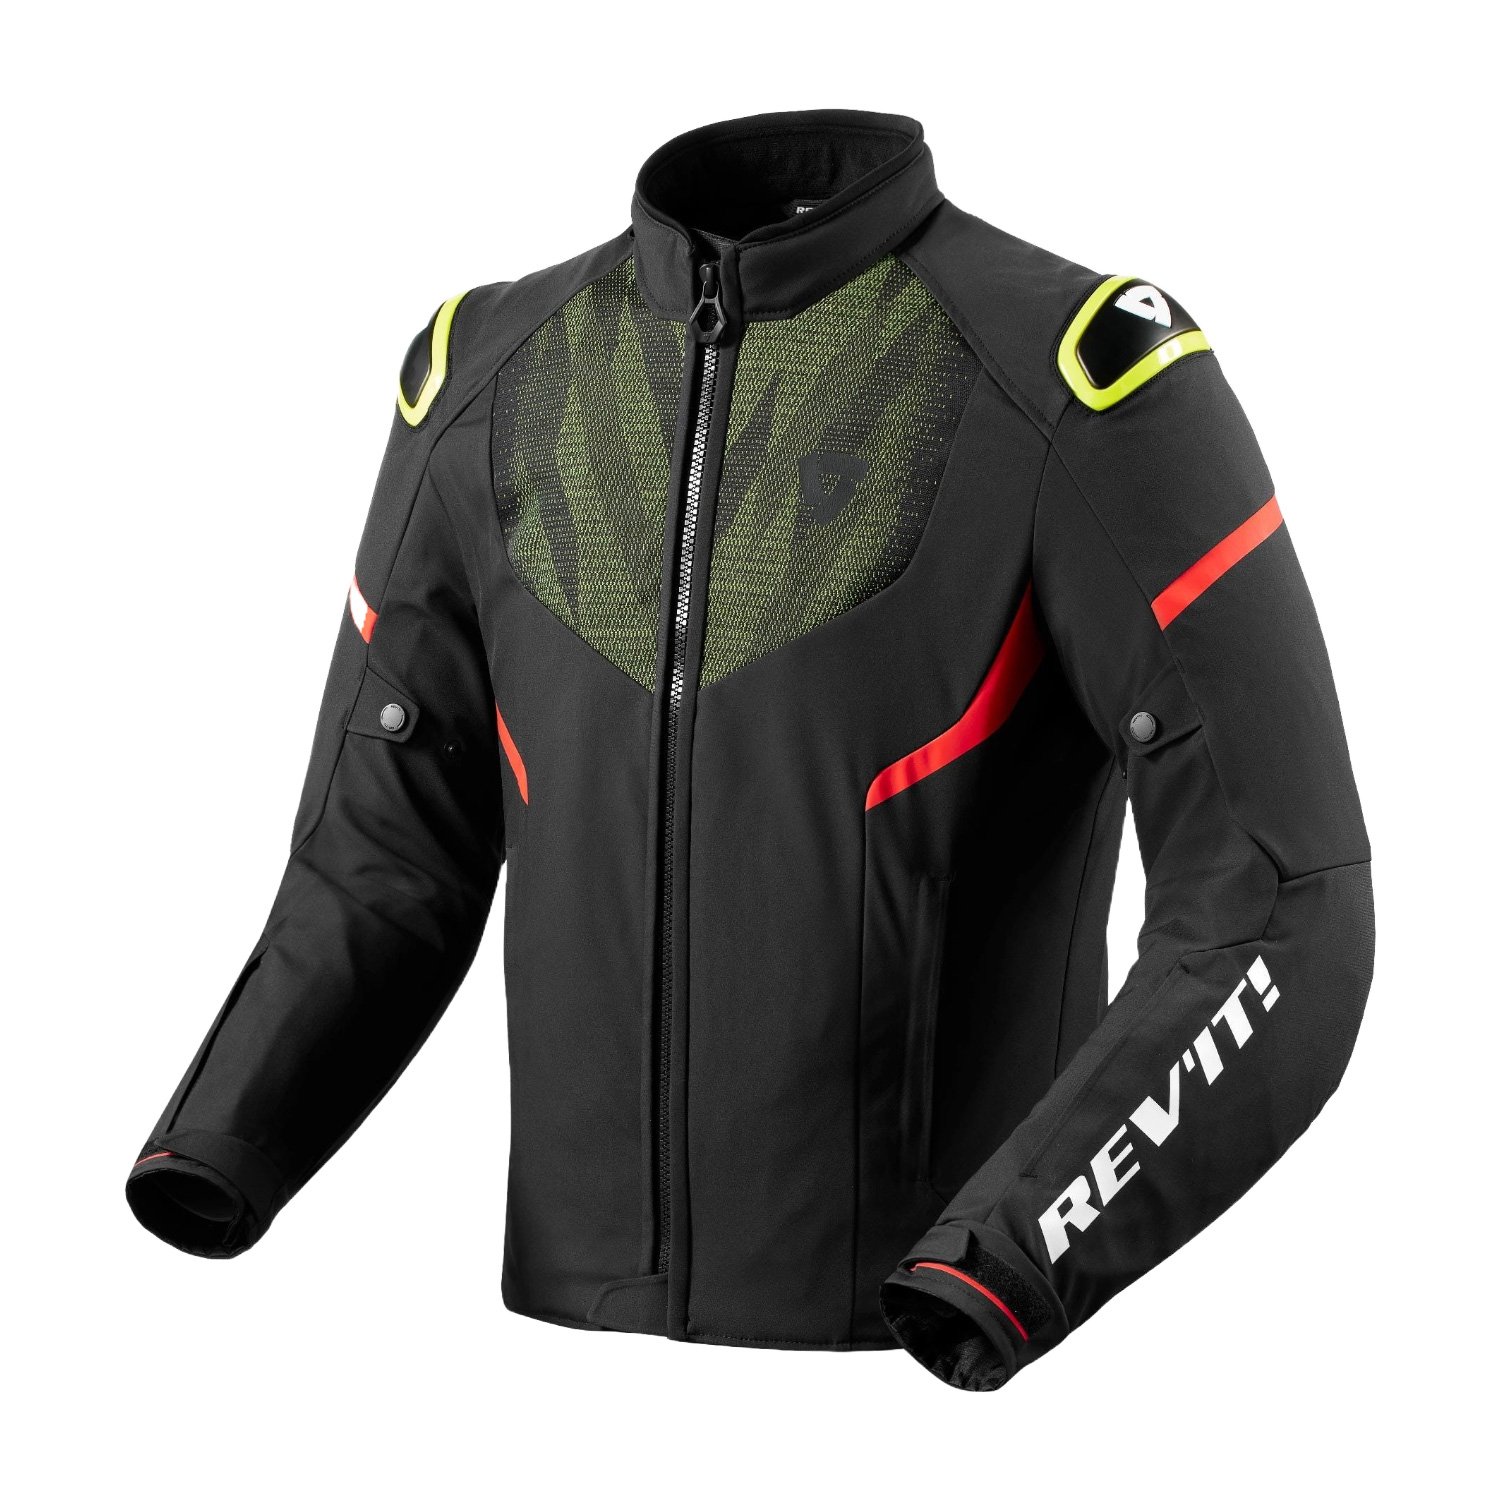 Image of REV'IT! Hyperspeed 2 H2O Jacket Black Neon Yellow Size XL ID 8700001367370